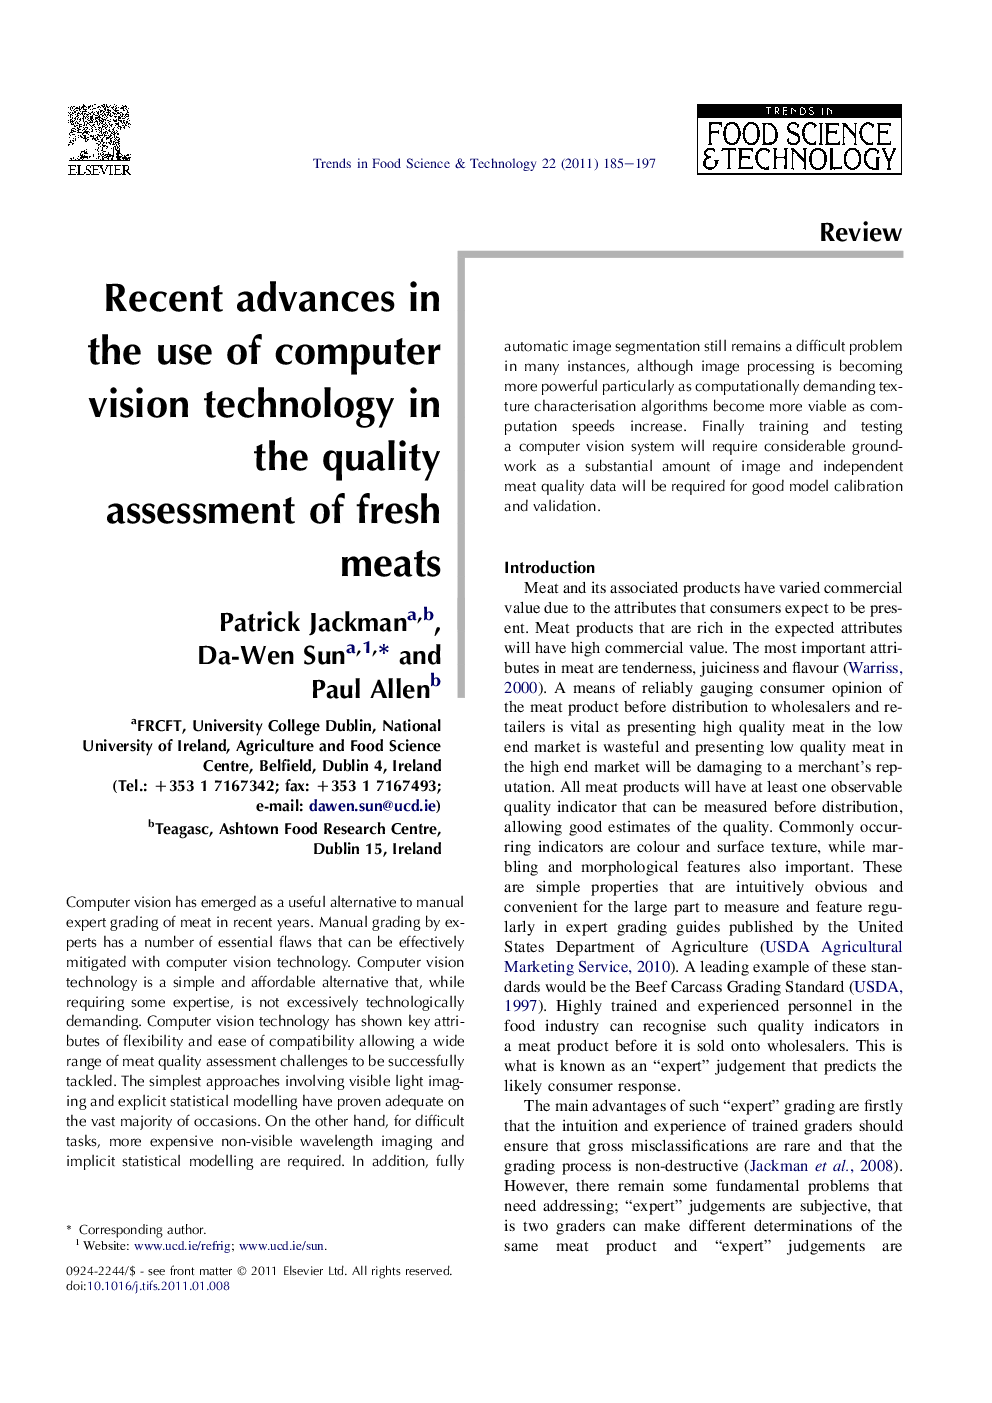 Recent advances in the use of computer vision technology in the quality assessment of fresh meats